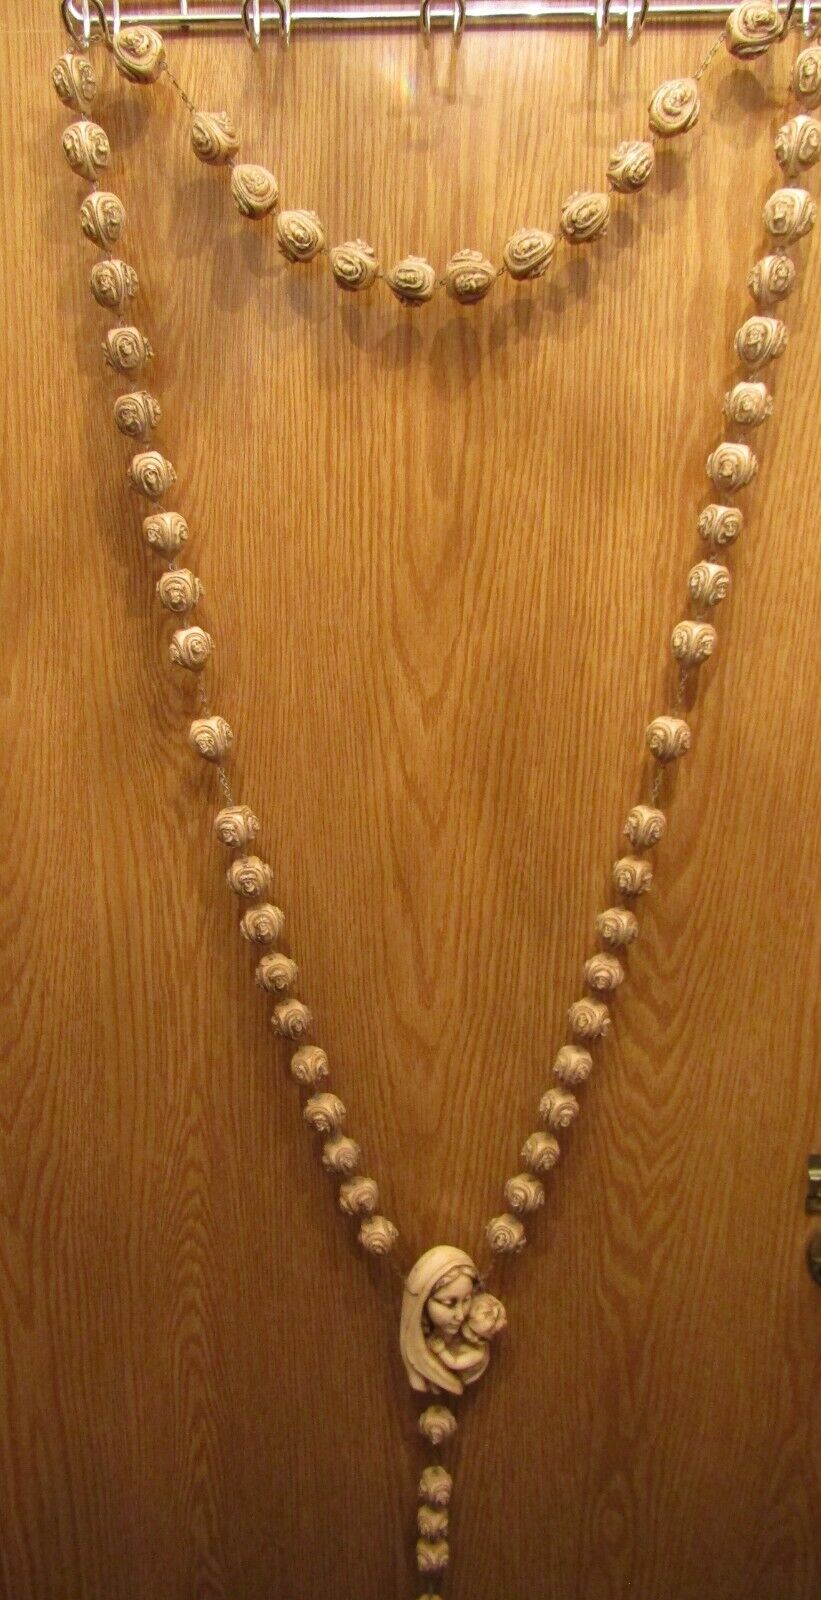 WONDERFUL INTRICATELY CARVED LARGE DOOR ROSARY, \